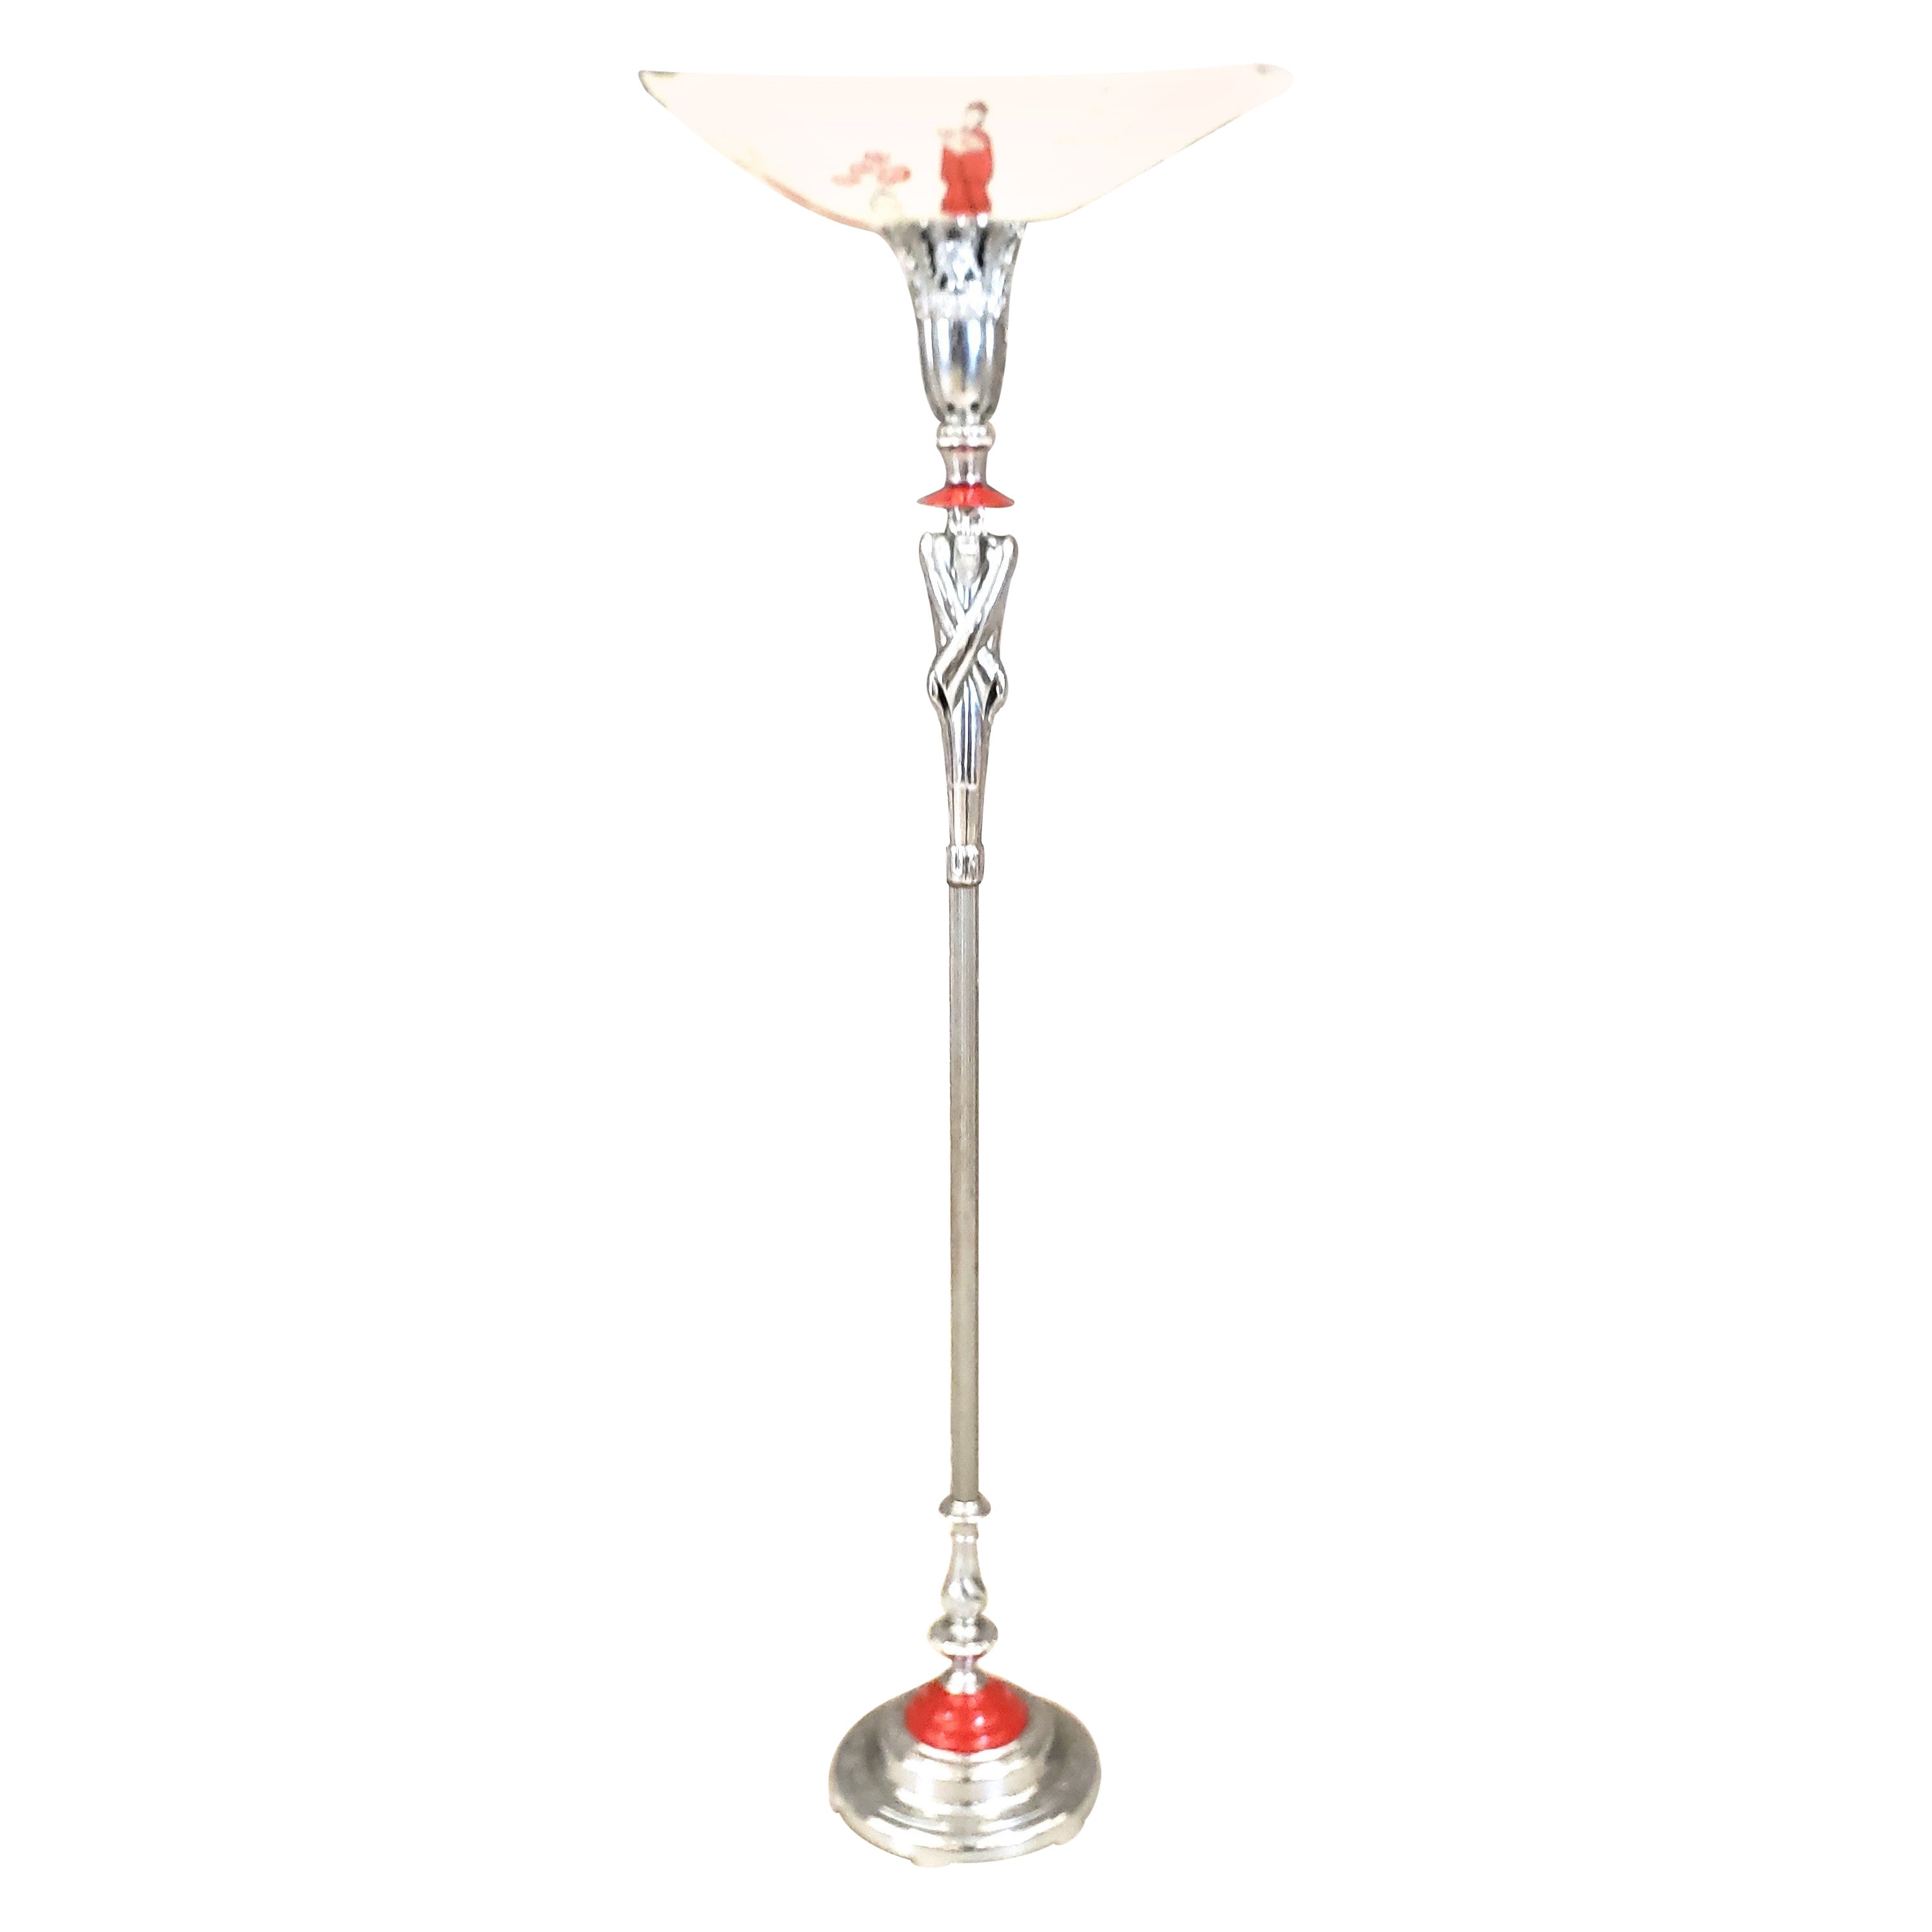 Antique Art Deco Chinoiserie Styled Chrome Torchiere Floor Lamp For Sale